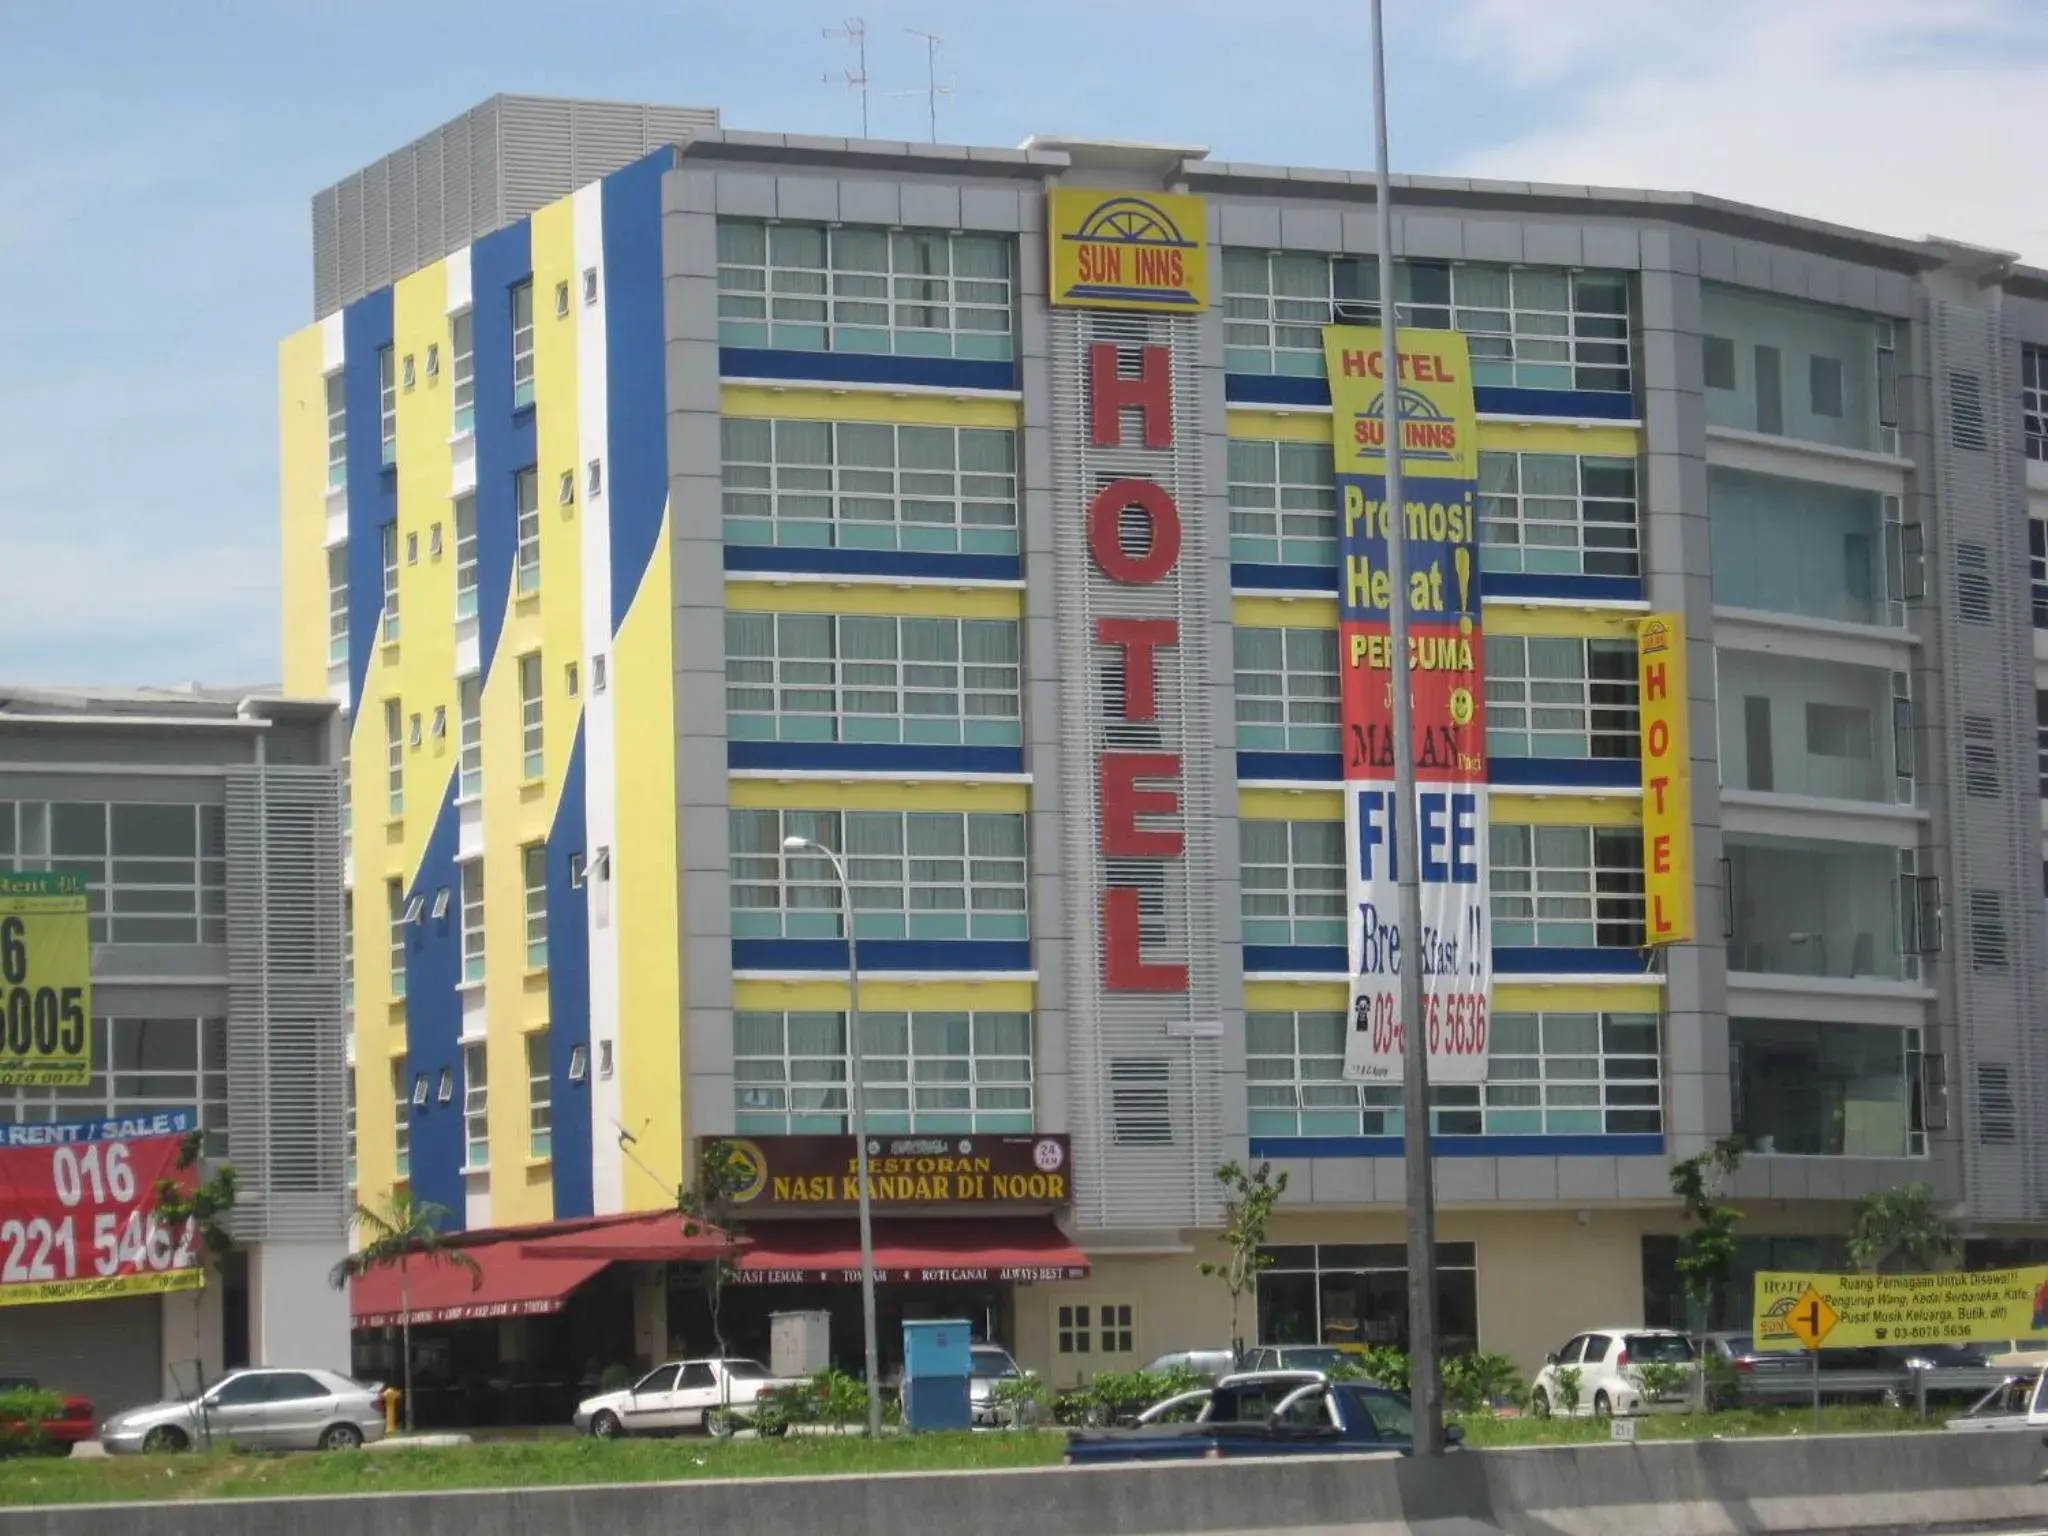 Property Building in Sun Inns Hotel Puchong